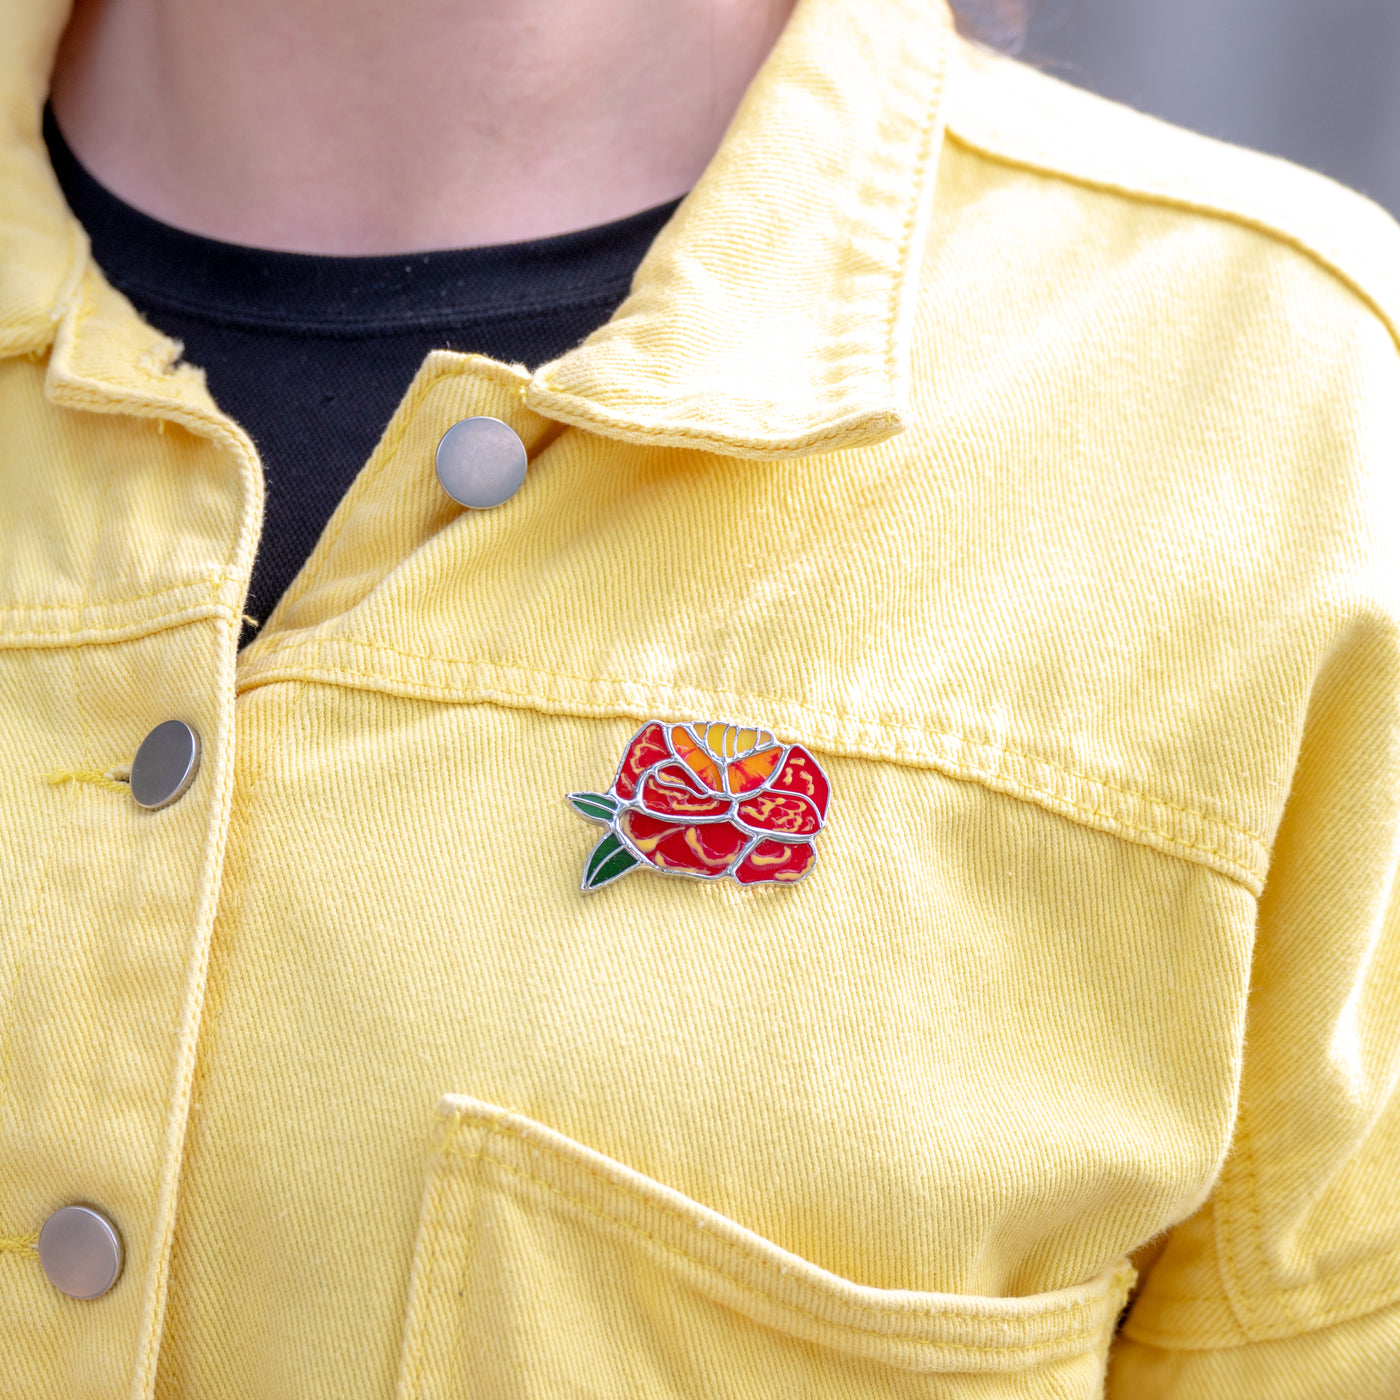 Stained glass marigold flower pin on a yellow jacket